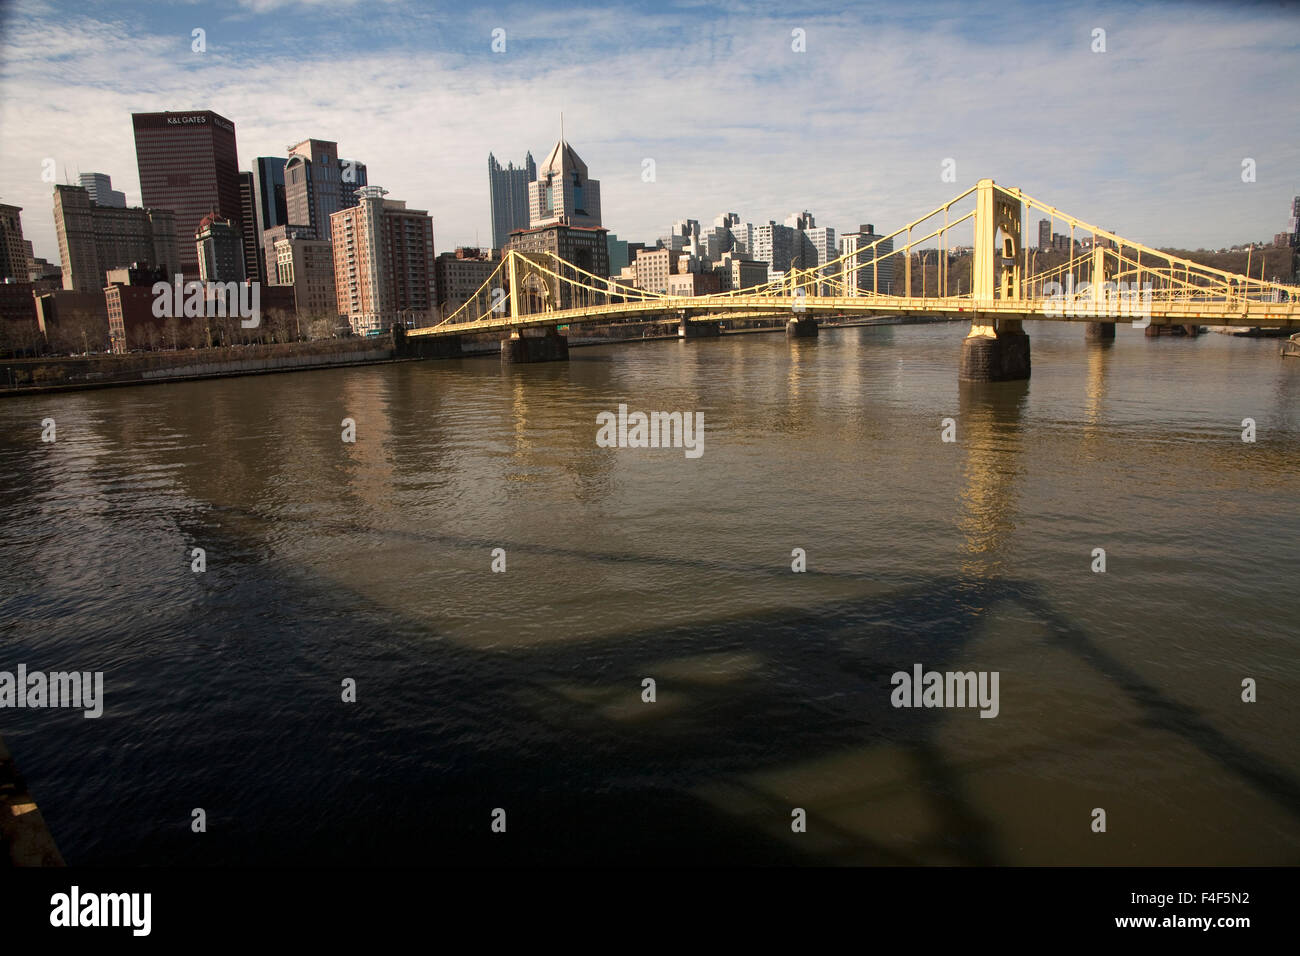 All bridges over the Allegheny River lead to the heart of Pittsburgh's downtown financial center. Stock Photo